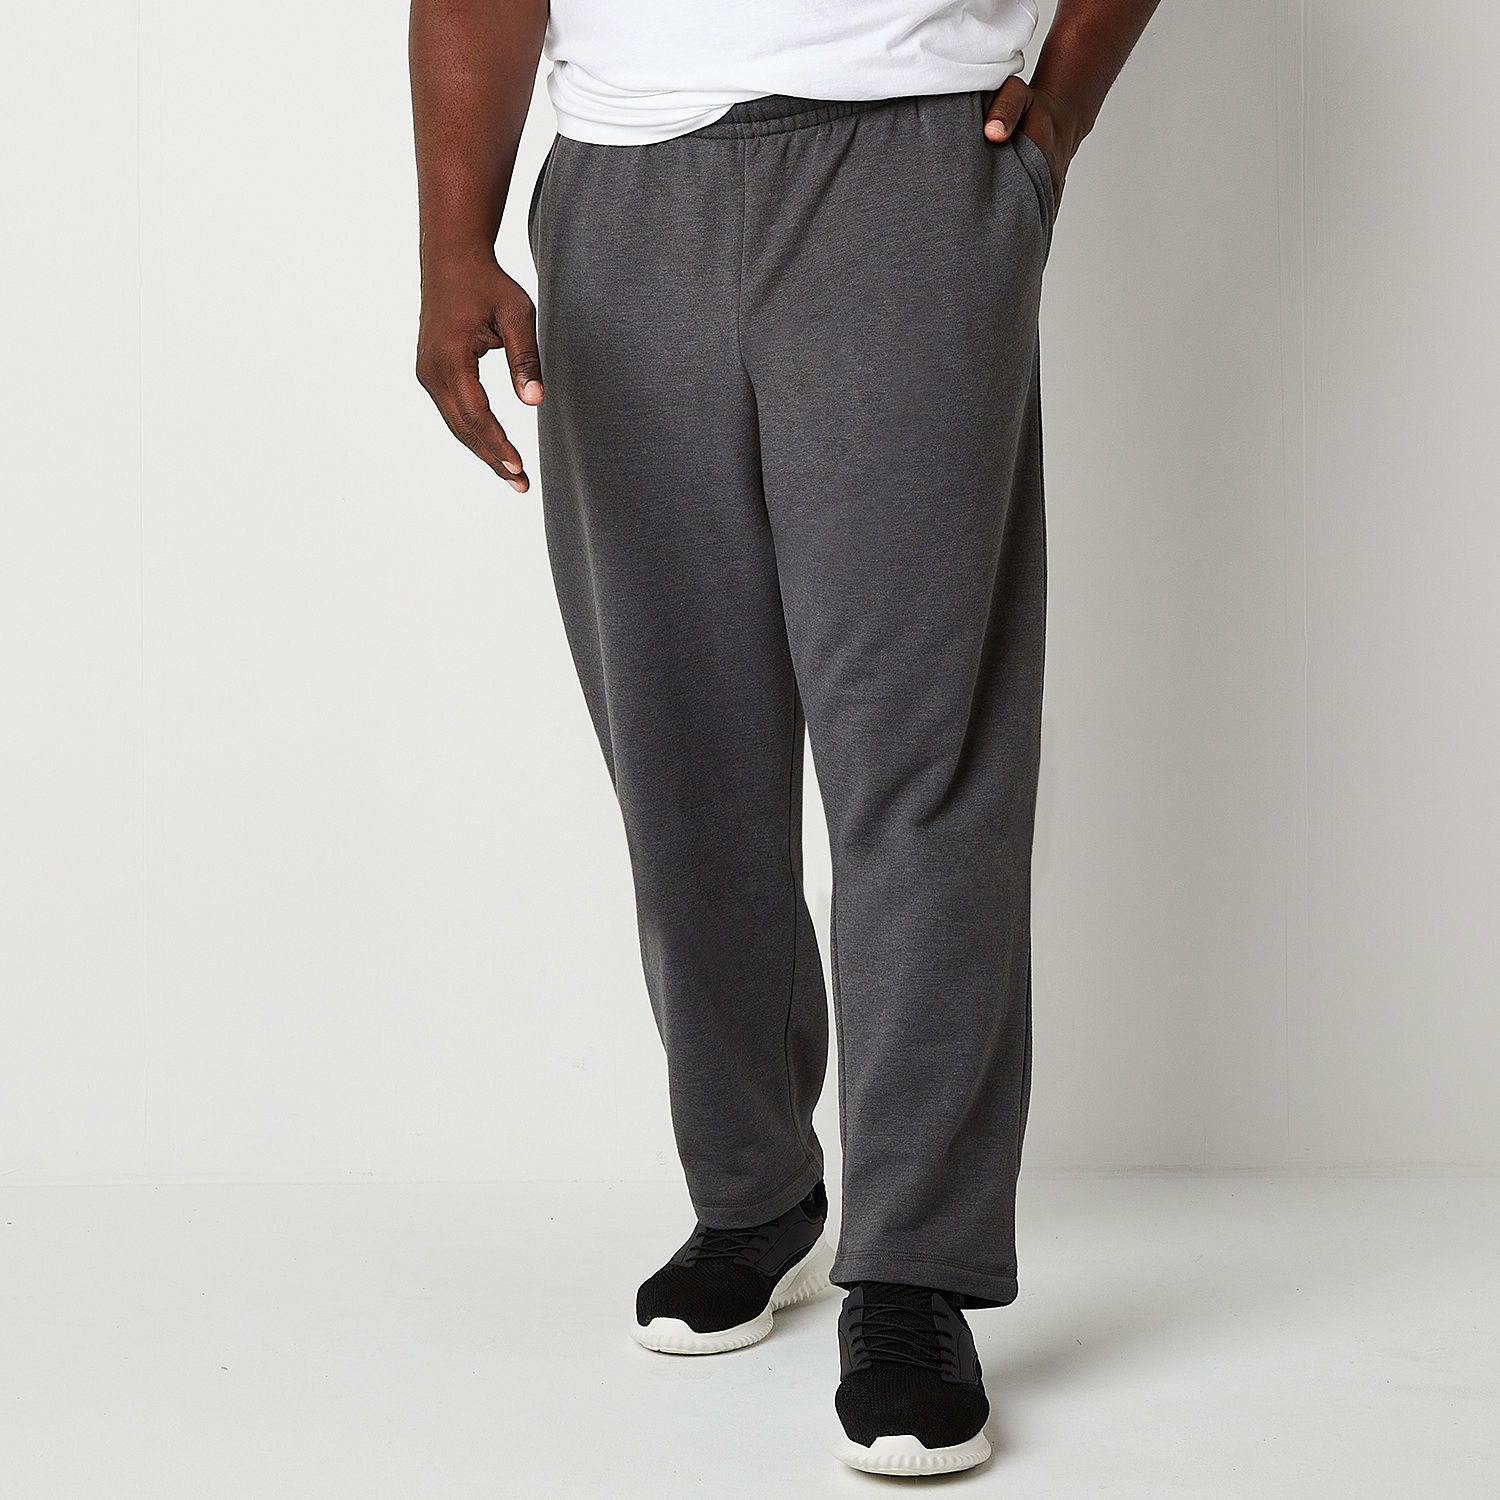 Xersion Quick Dry Cotton Fleece Mens Mid Rise Big and Tall Workout Pant ...